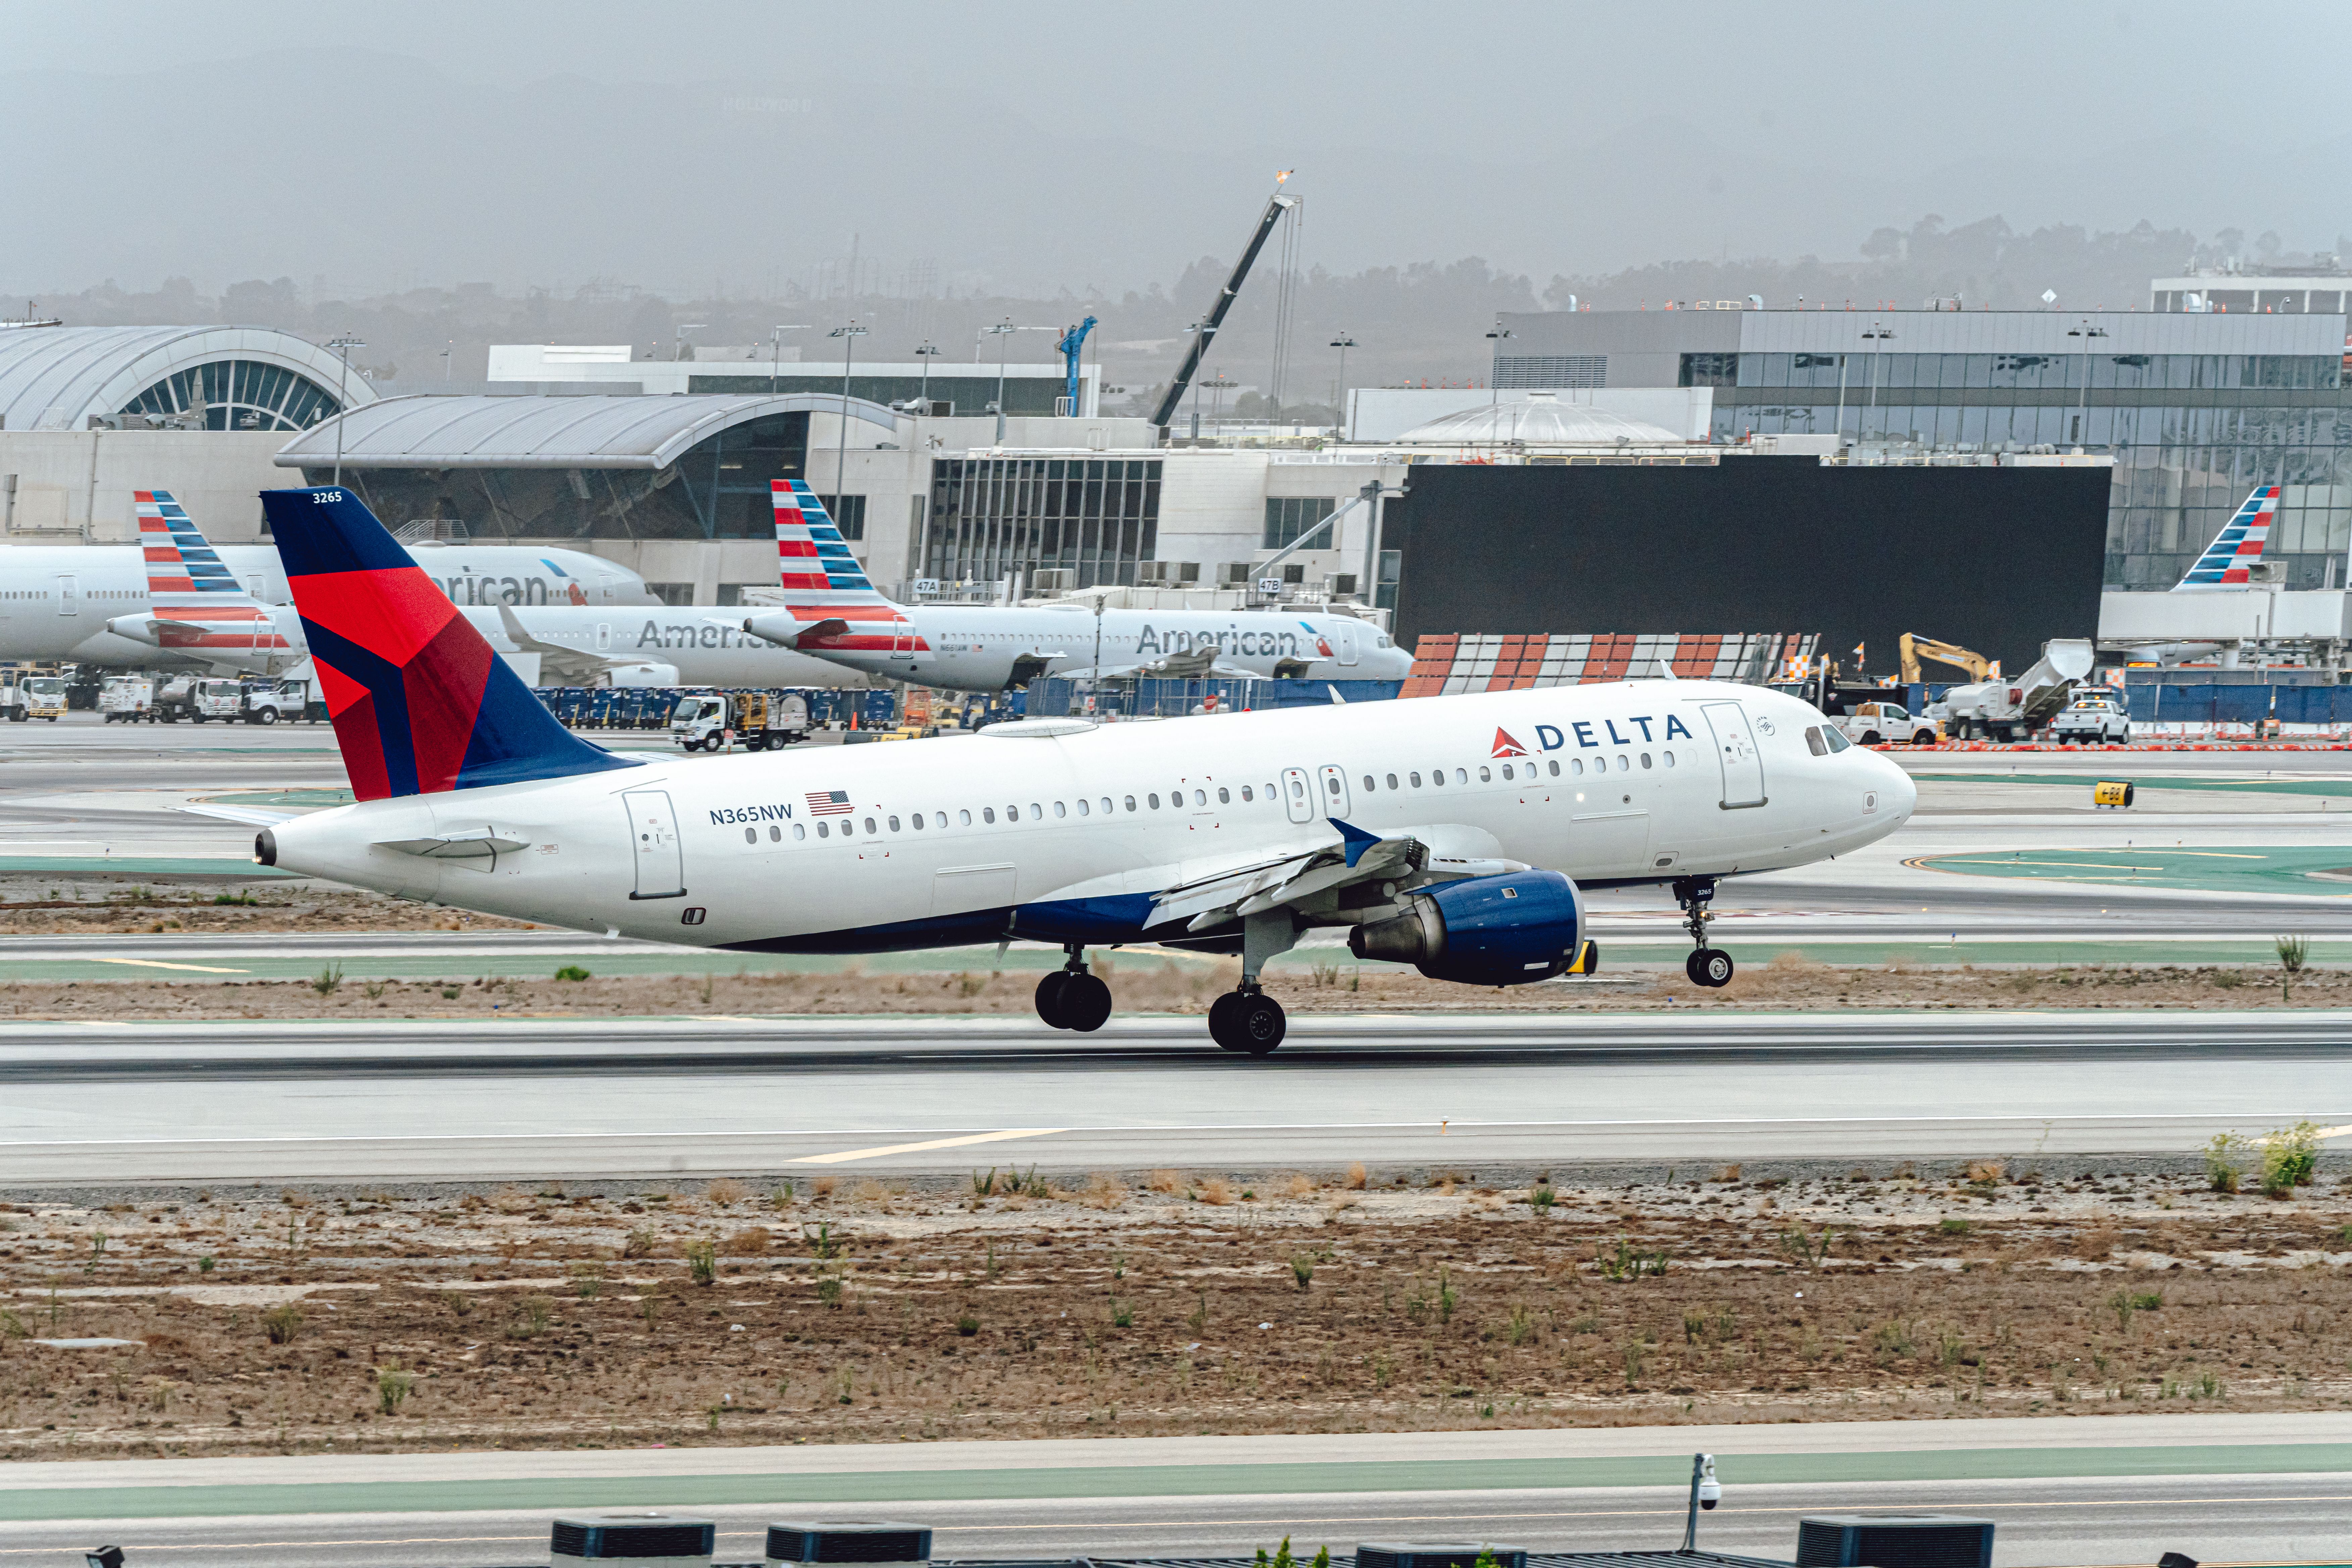 A Delta Air Lines Airbus A320 landing at LAX.